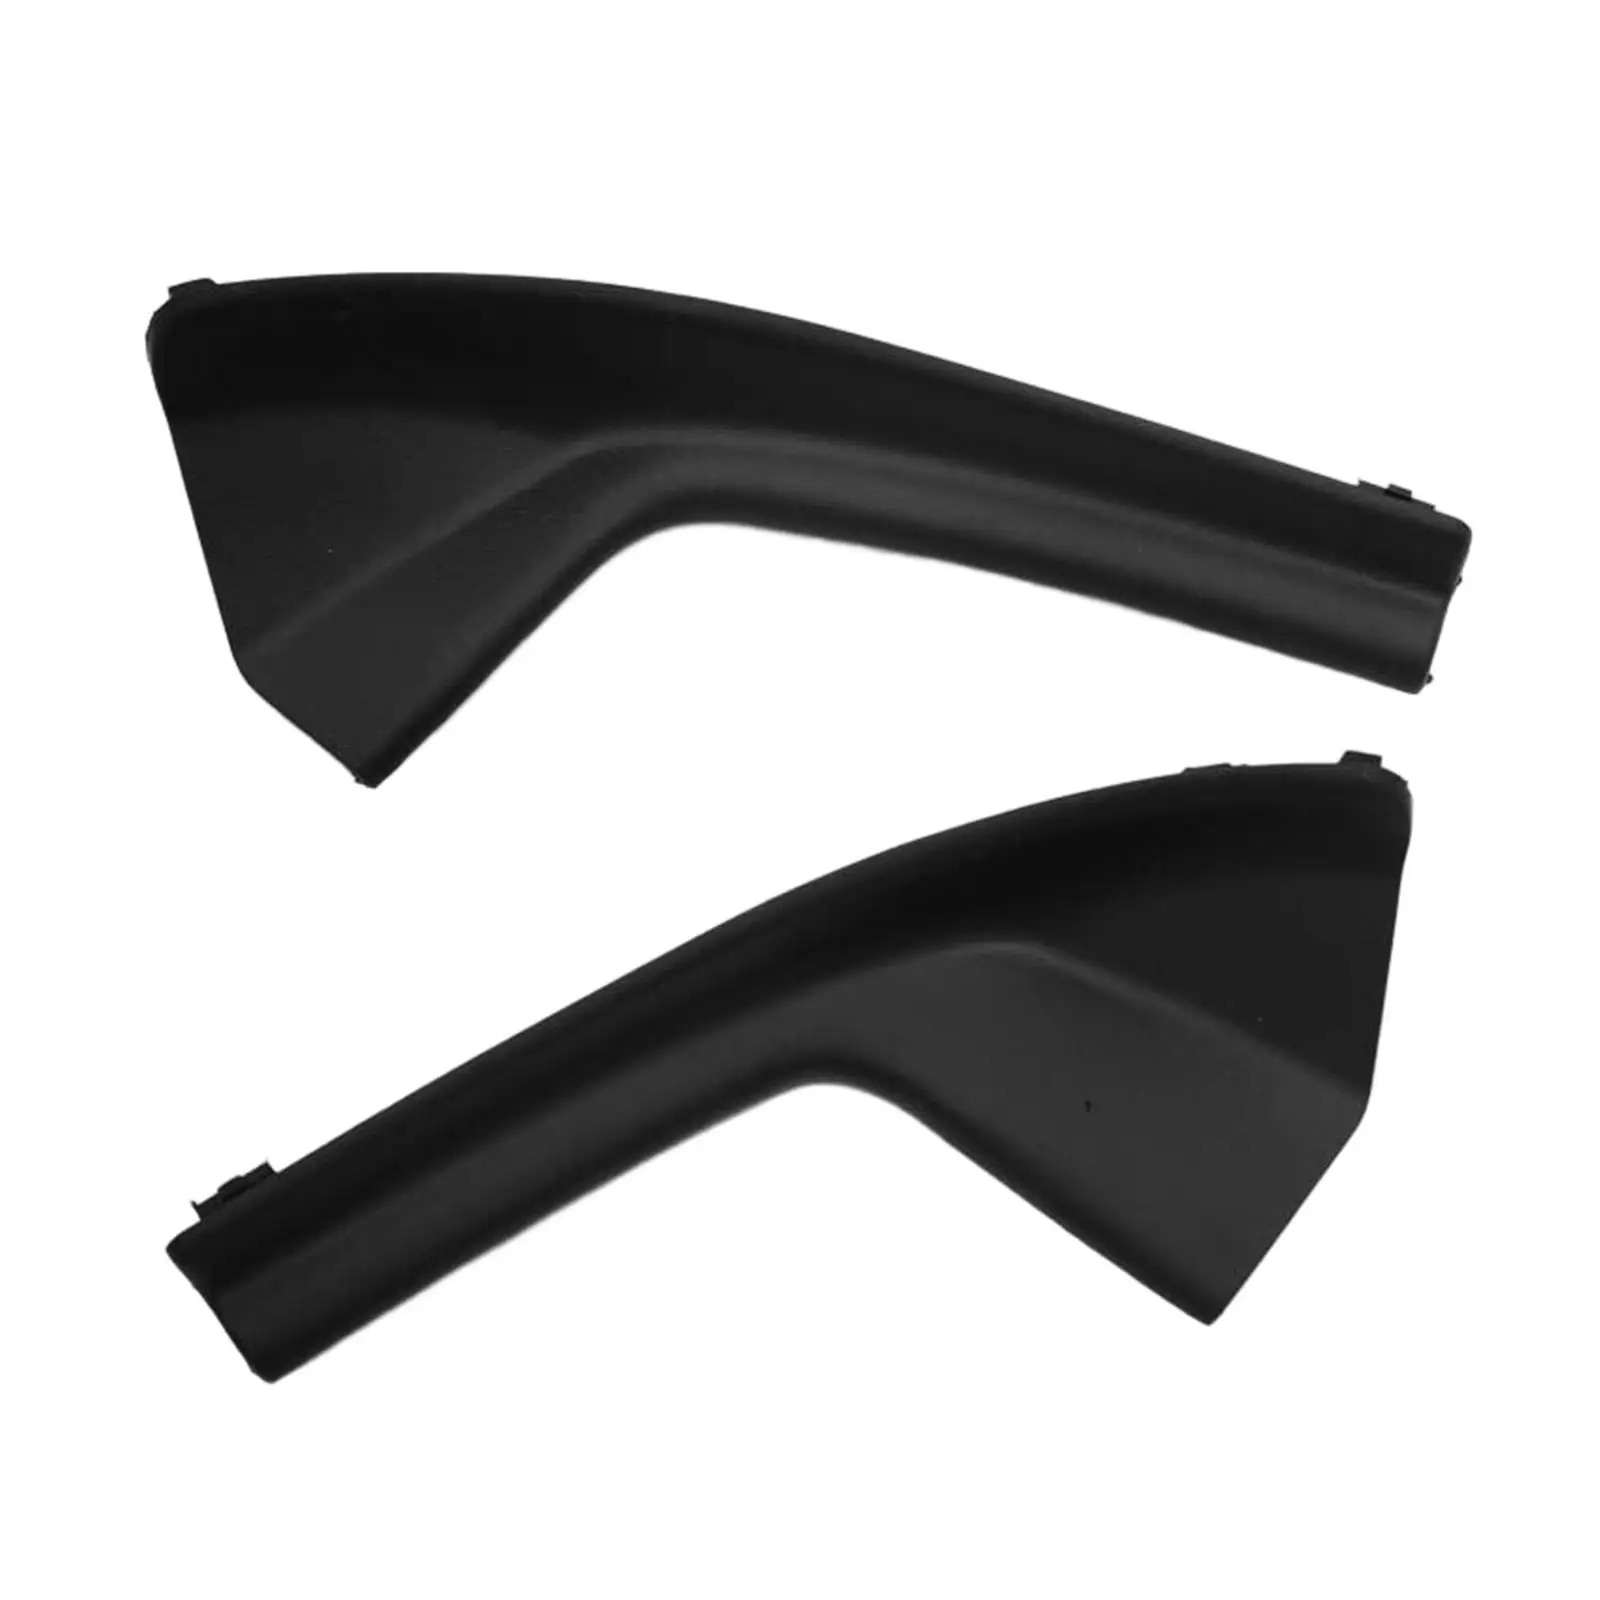 2x Front Windshield Wiper Side Cowl Extension Trim Cover 66895-ed50A 66894-ed500 Replaces for Nissan Versa Sedan Tiida C11